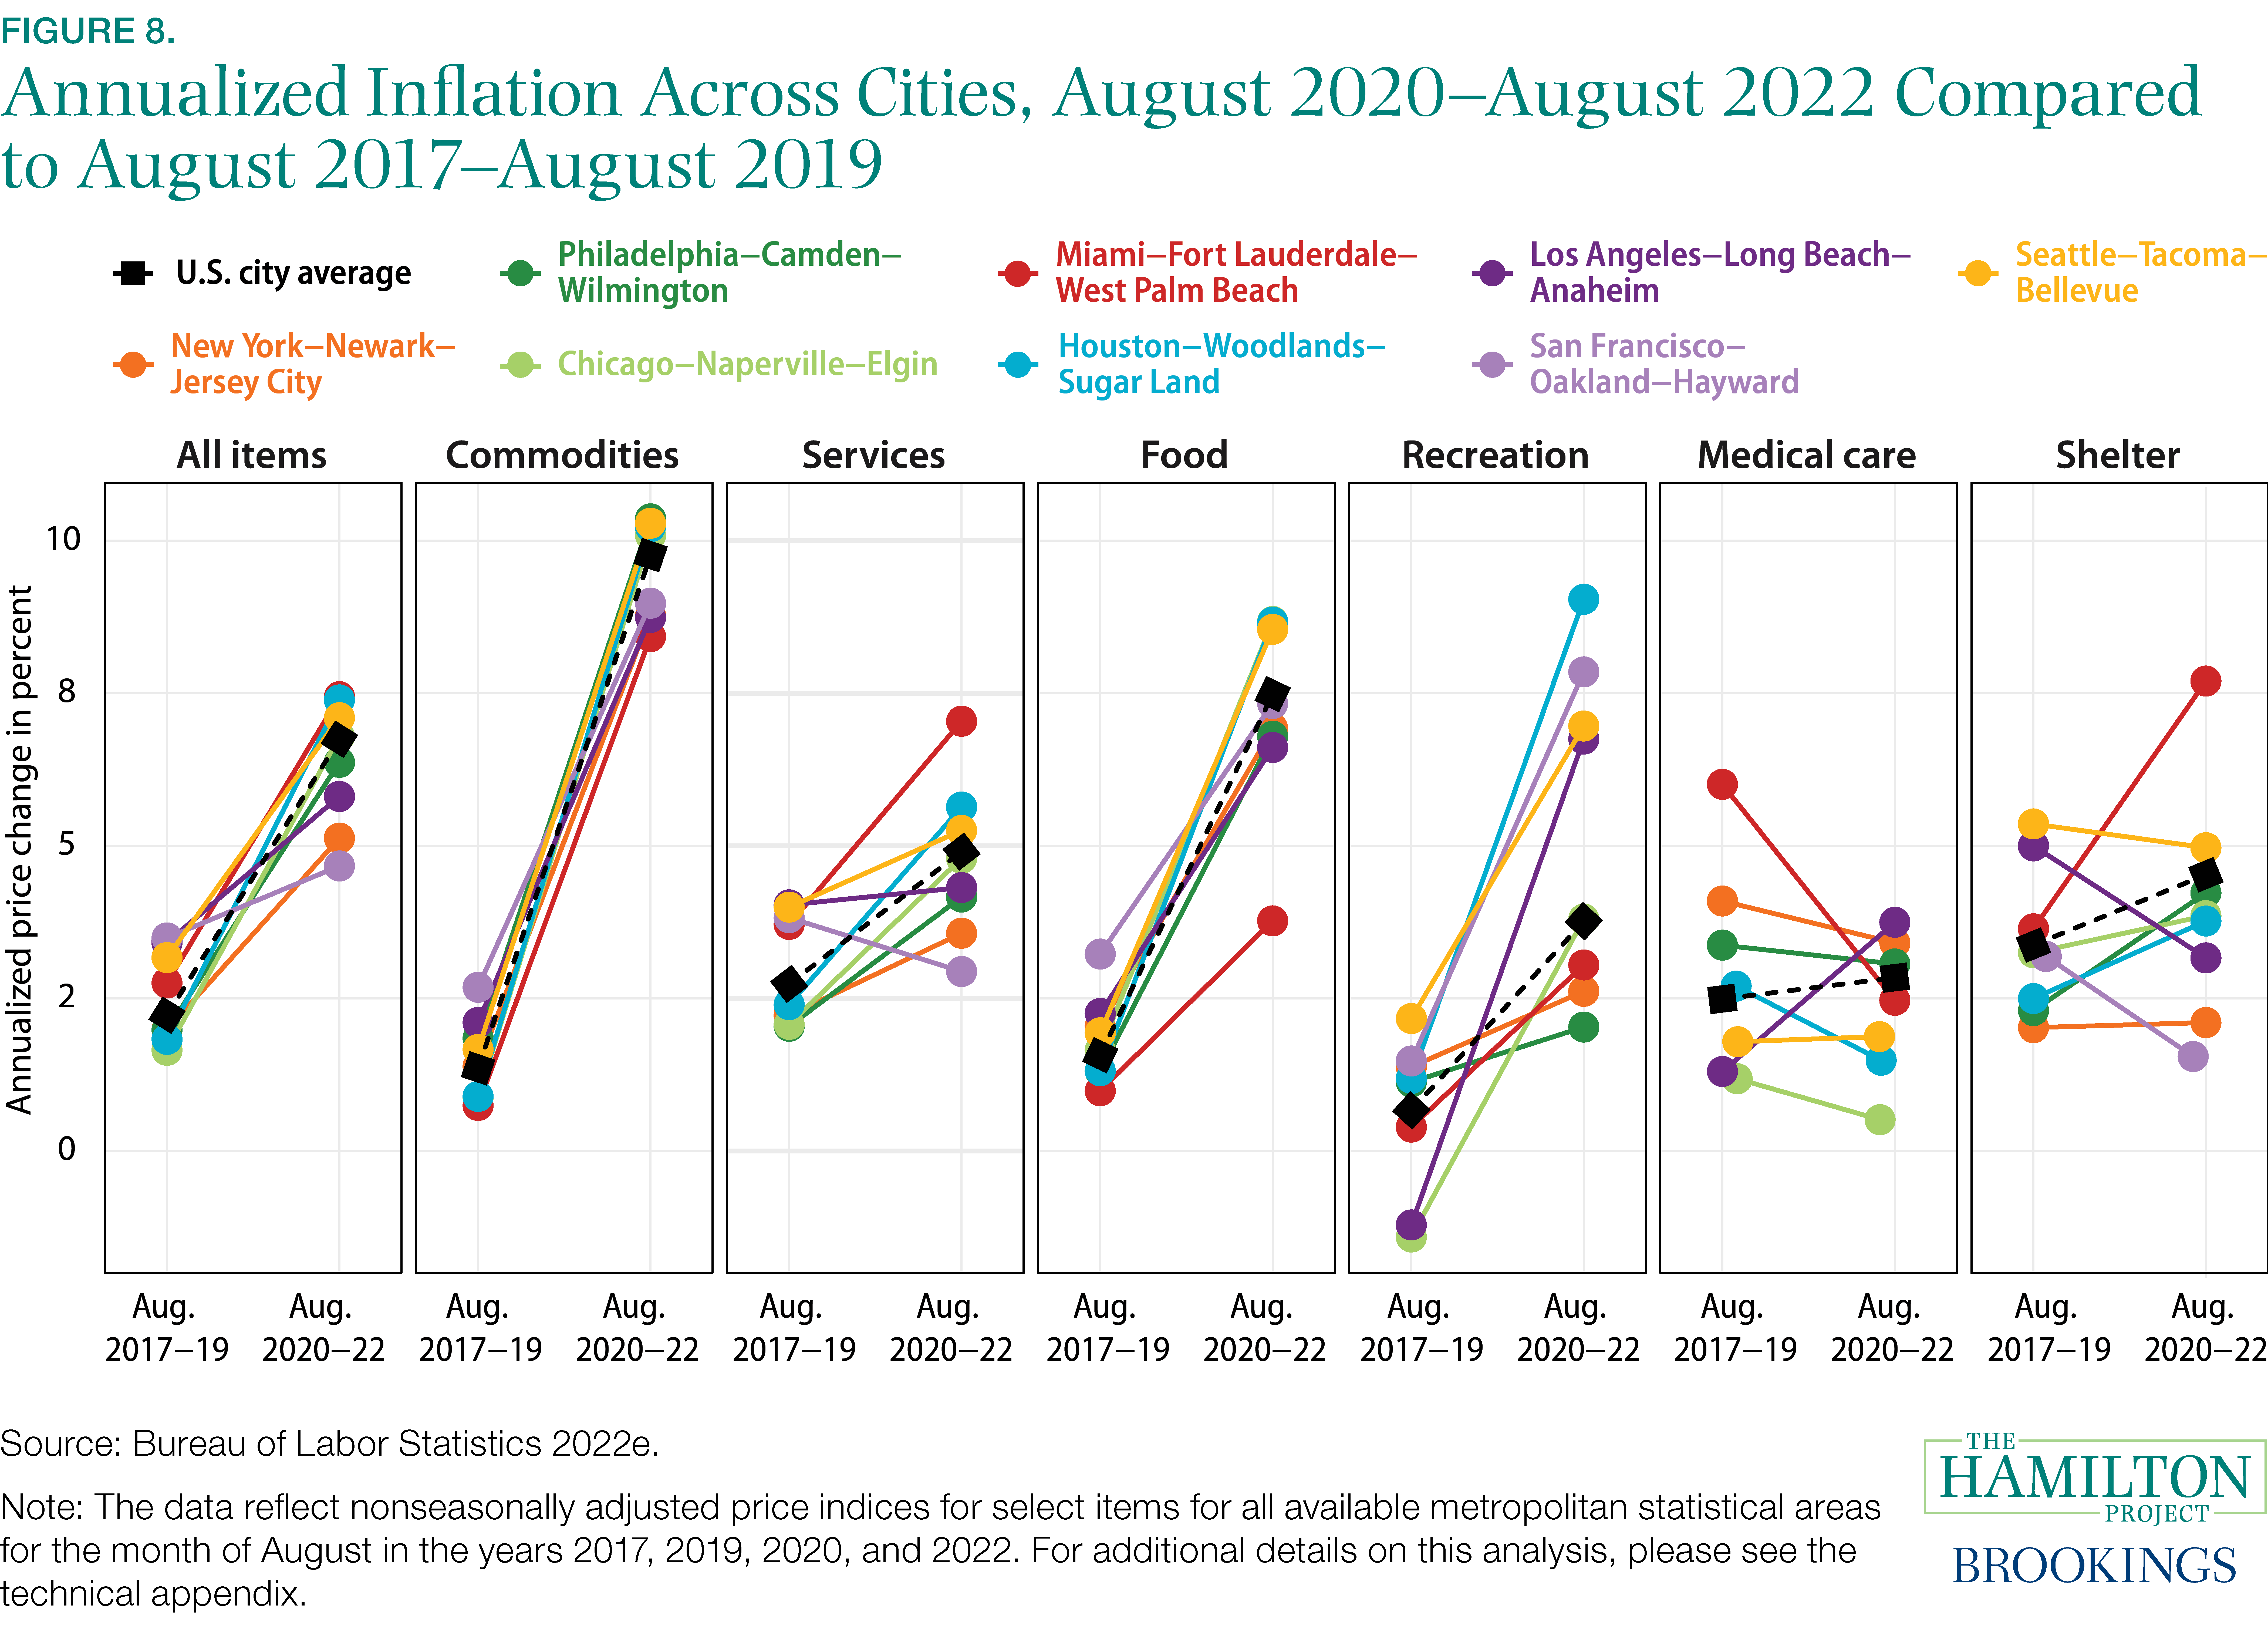 Figure 8. Annualized Inflation across Cities: June 2020–June 2022 Compared to June 2017–June 2019 